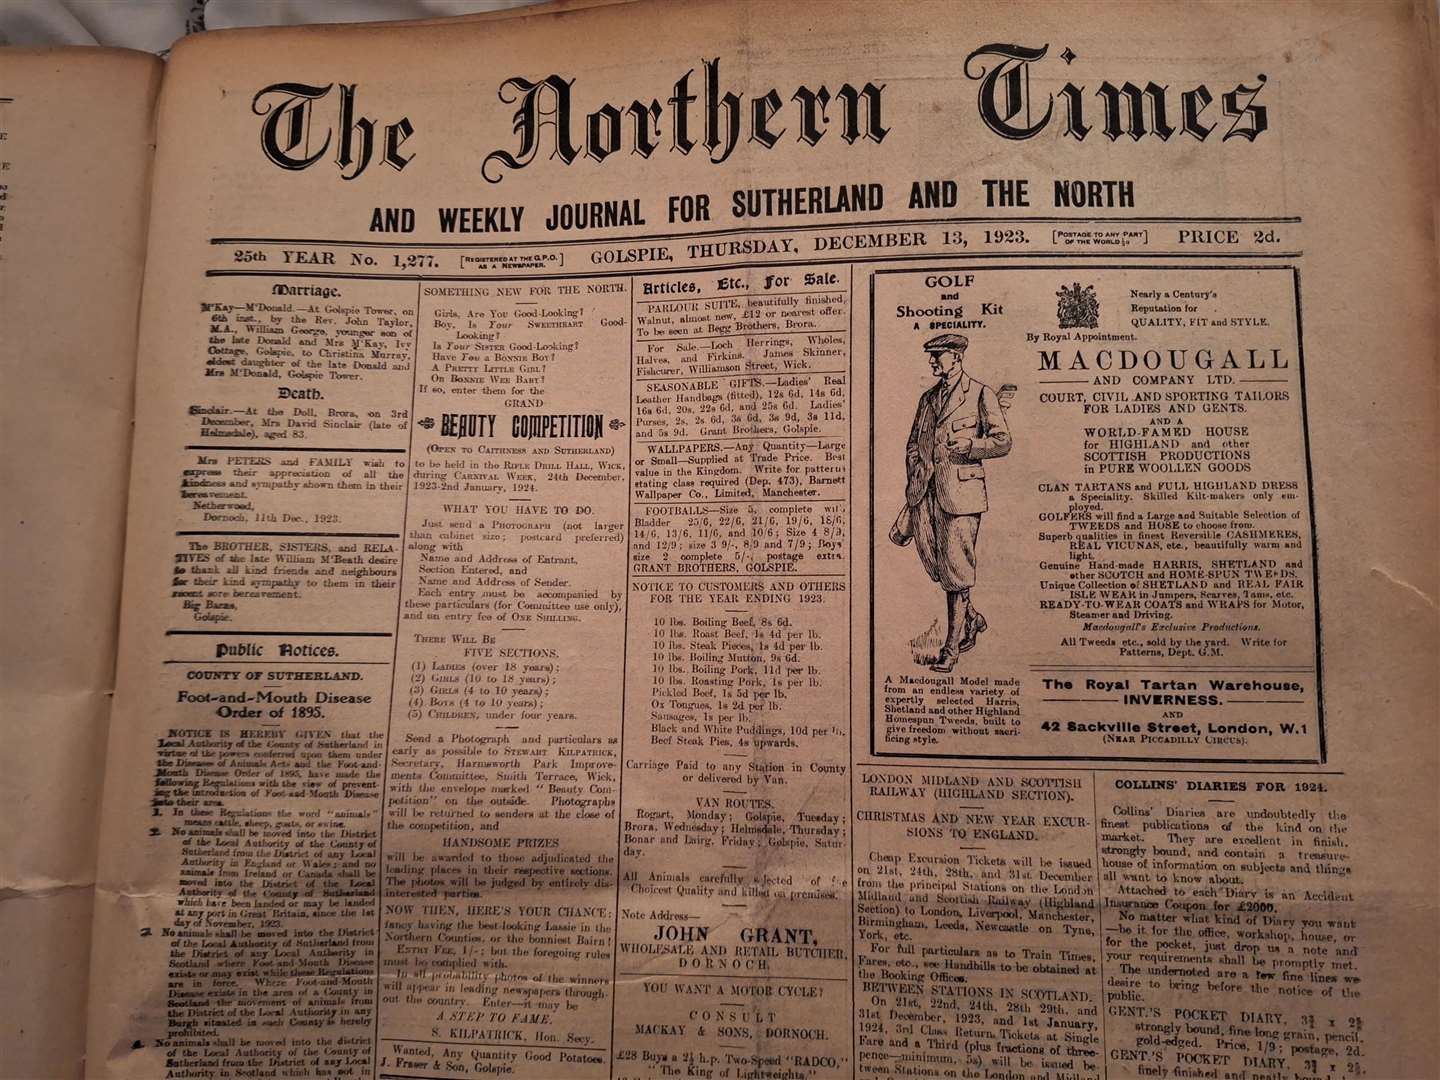 The edition of December 13, 1923.